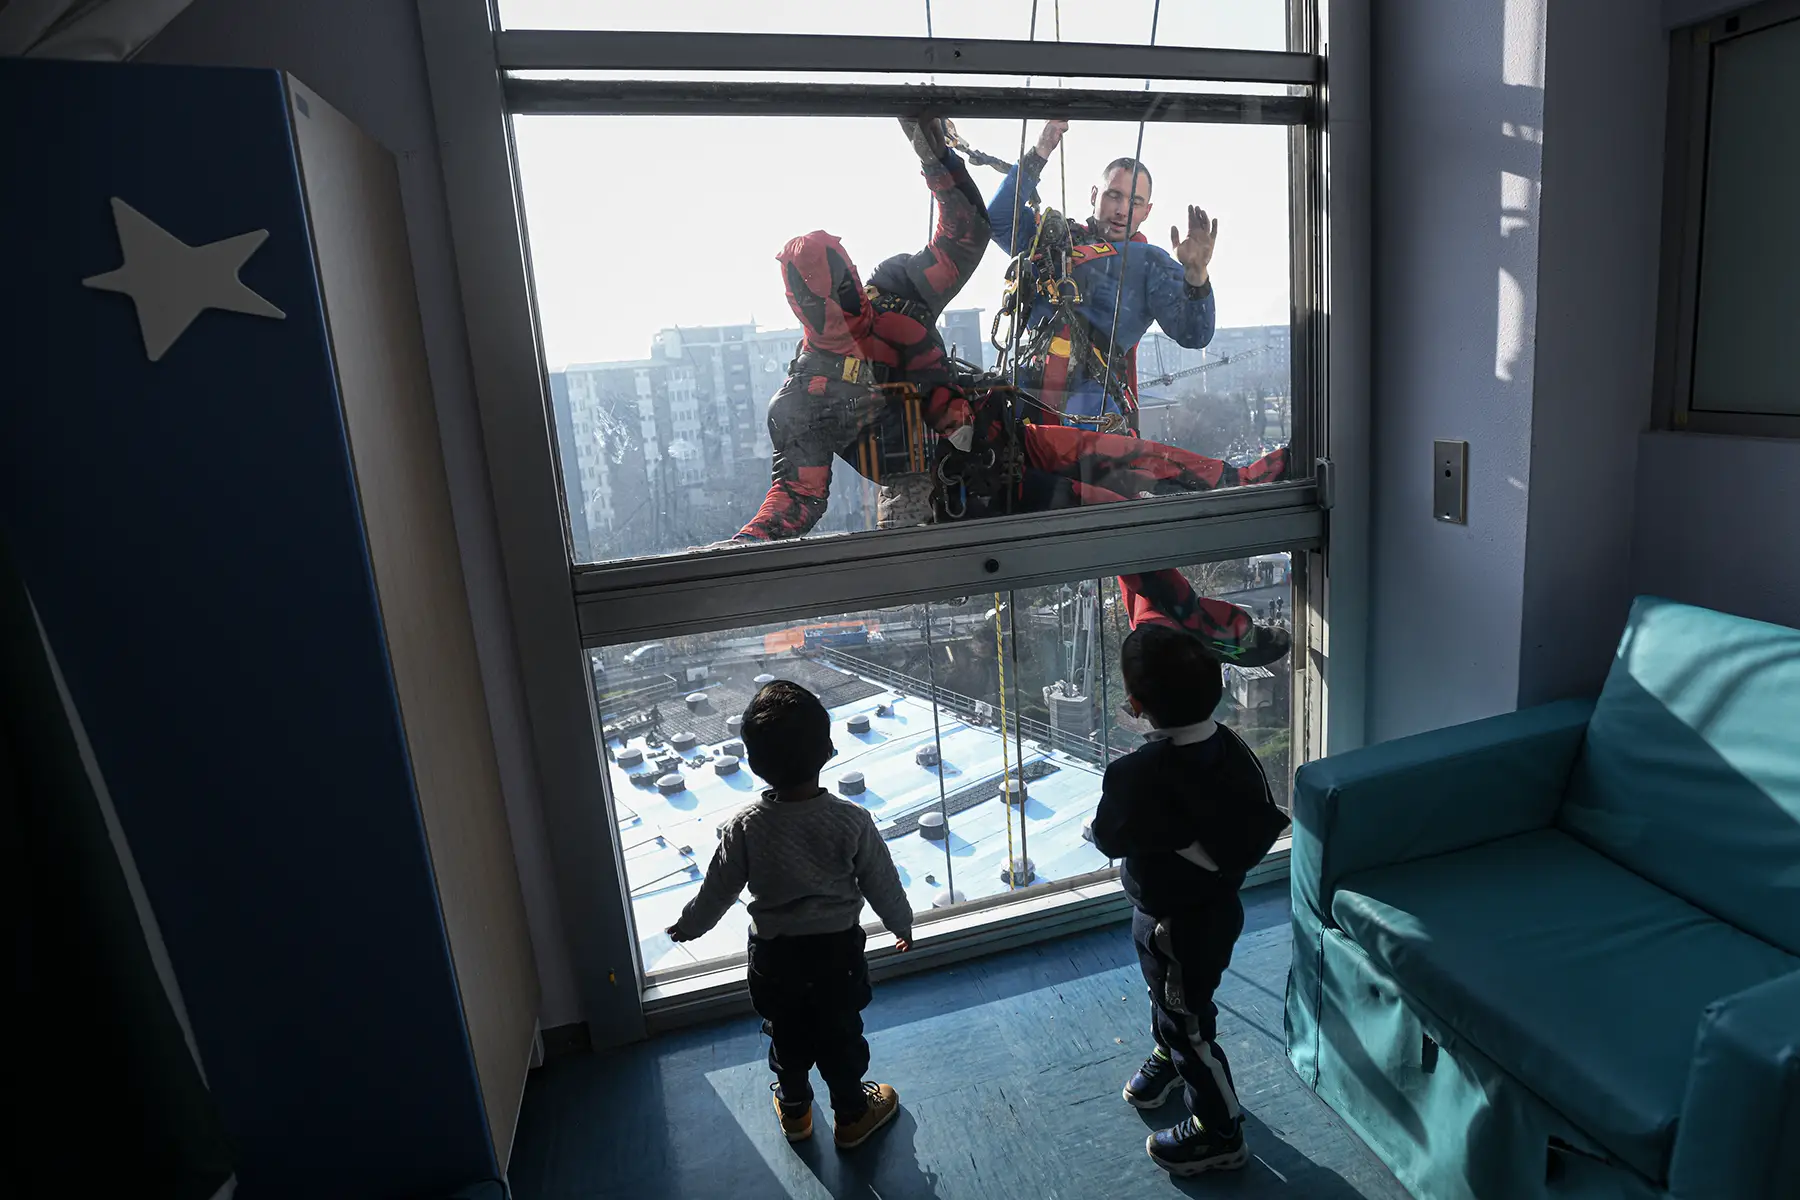 People dressed as superheroes clean the windows of a hospital as two children inside watch them.